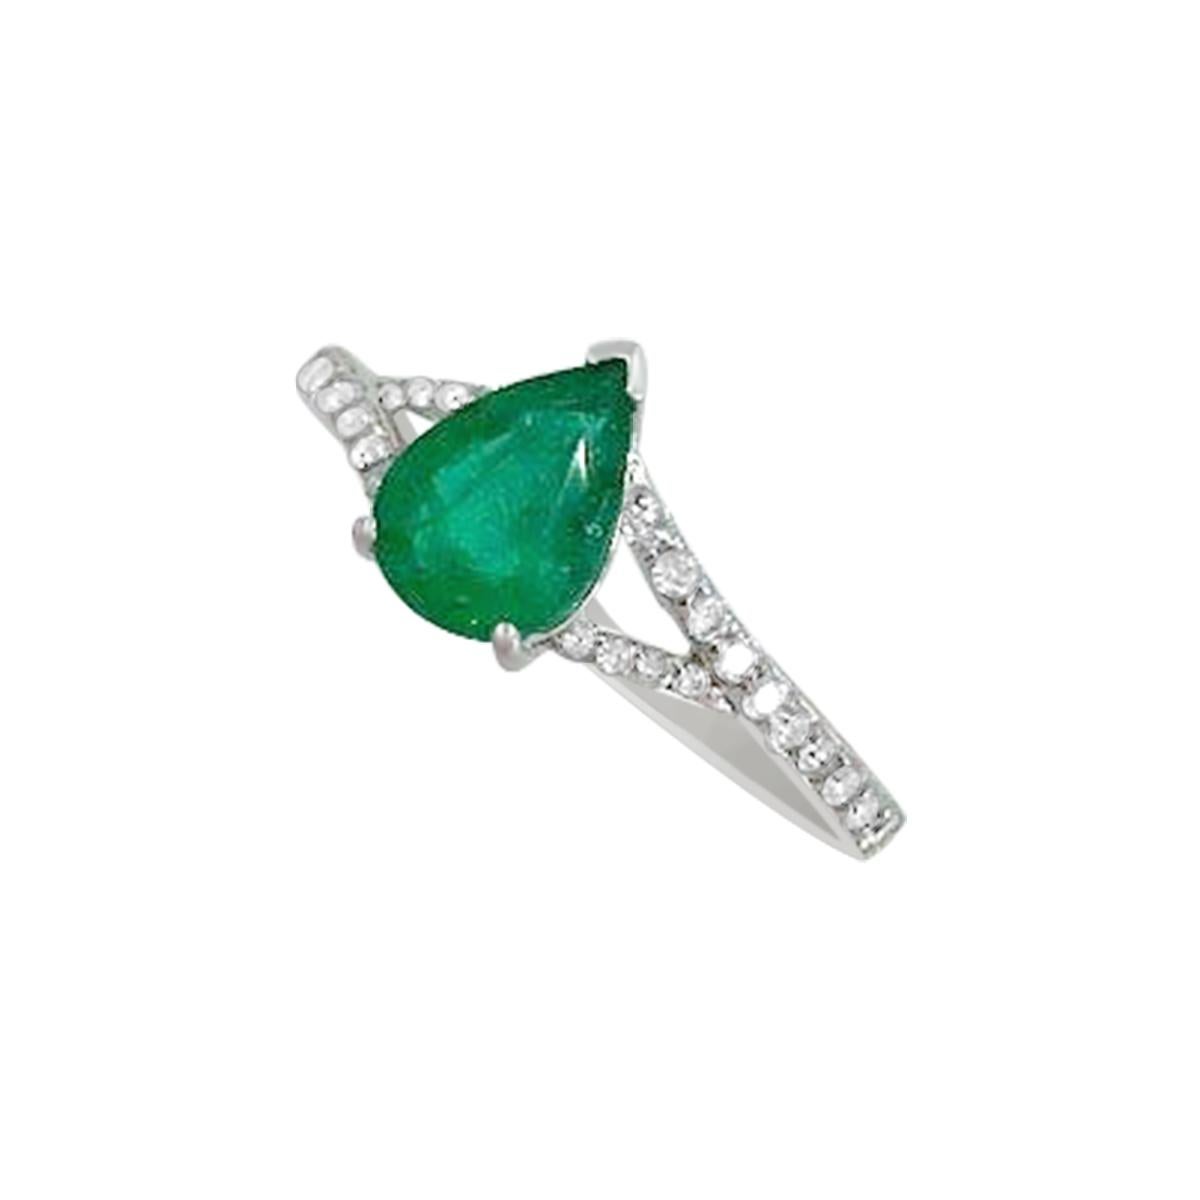 Modern 18K White Gold 0.99cts Emerald and Diamond Ring, Style# TS1024R